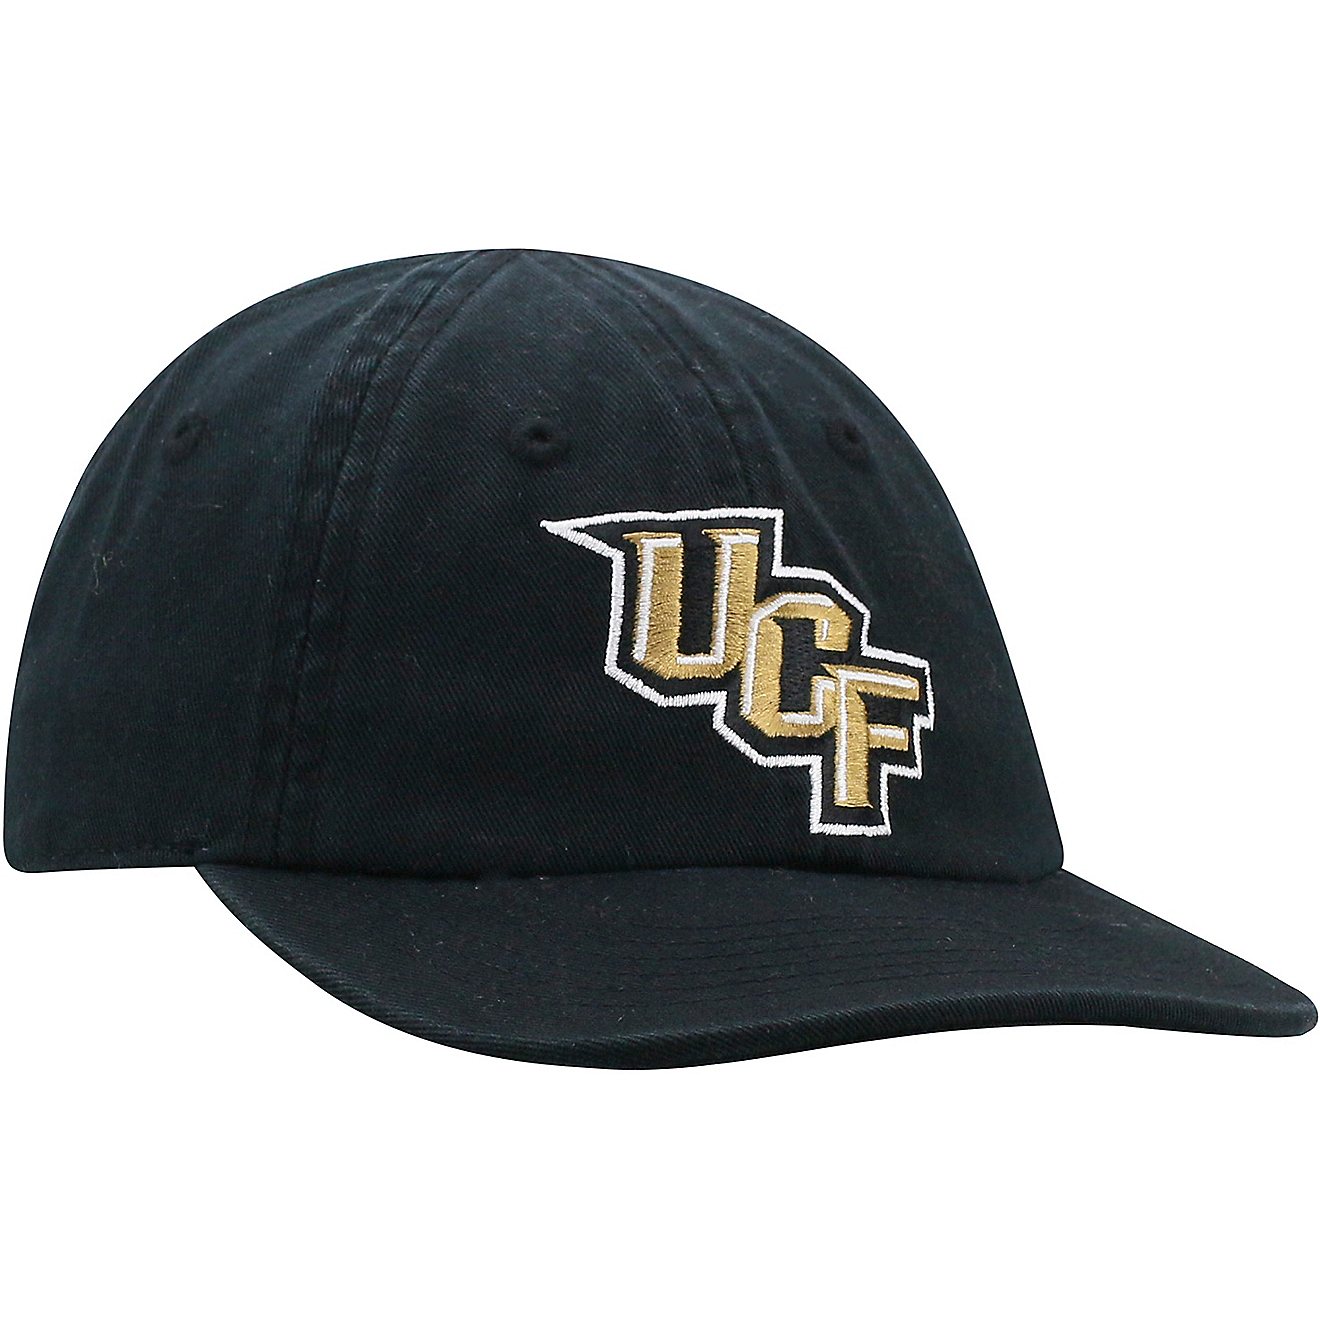 Top of the World Infants' University of Central Florida Mini Me Cap                                                              - view number 3